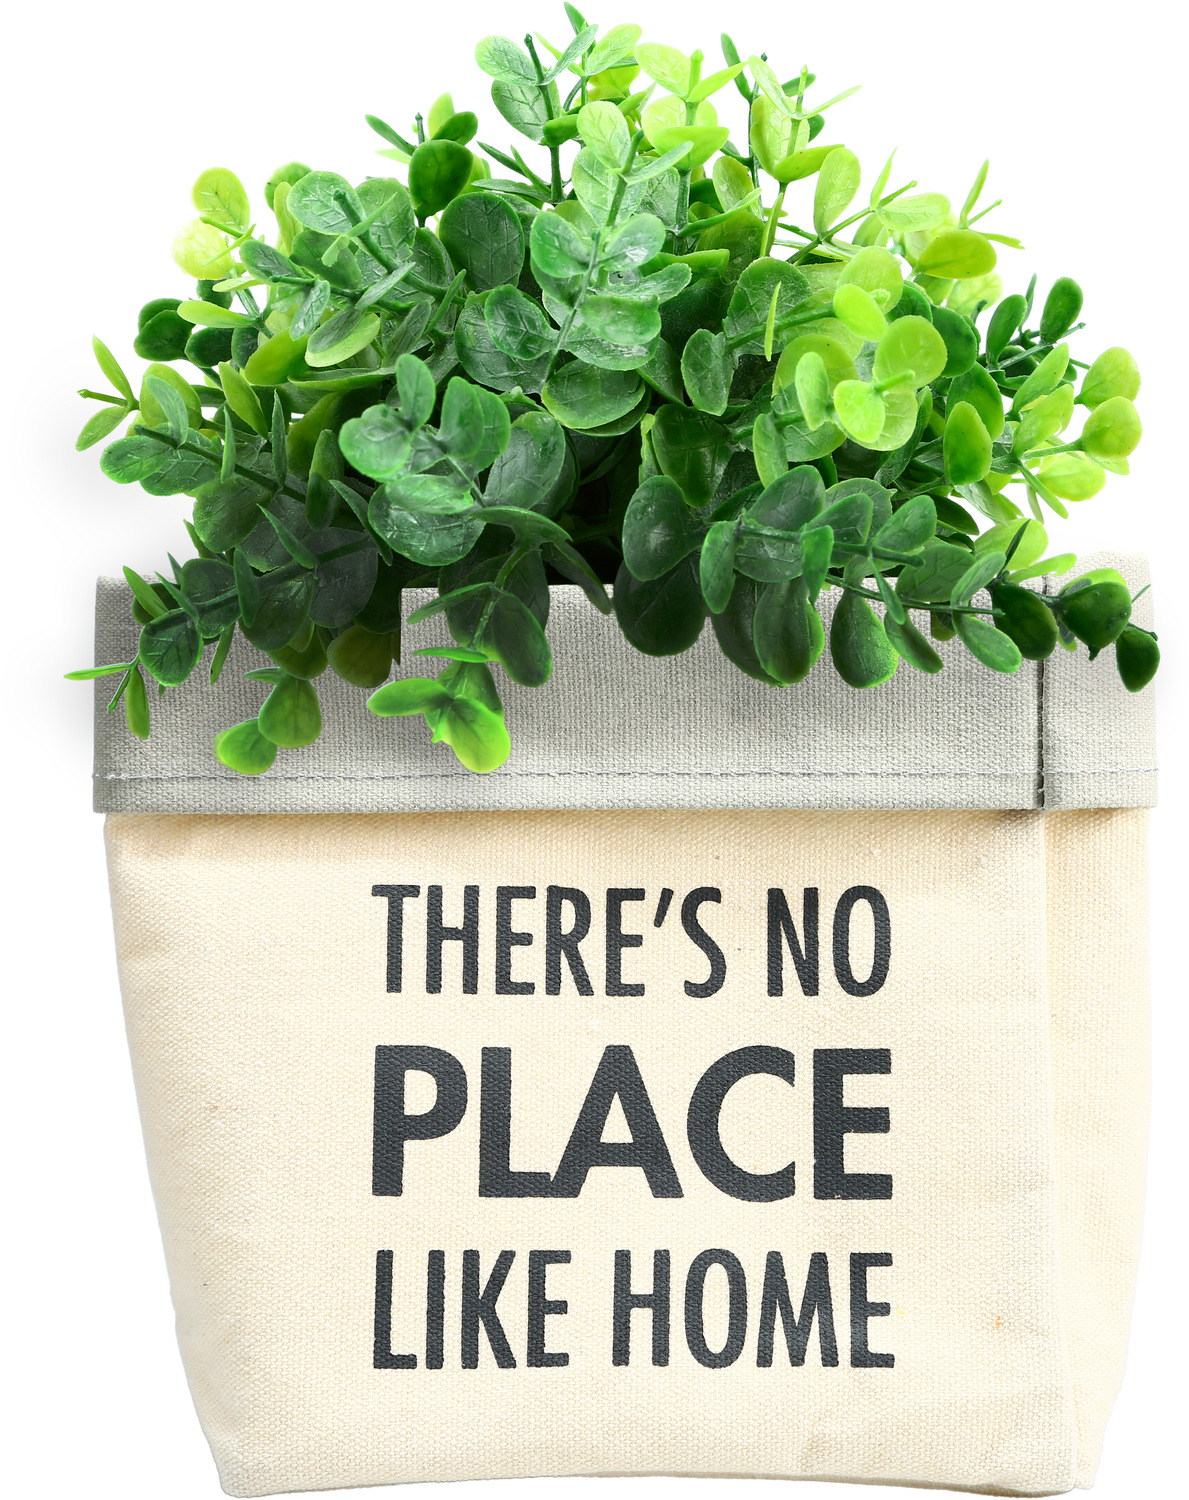 Place Like Home by Open Door Decor - Place Like Home - Canvas Planter Cover
(Holds a 6" Pot)